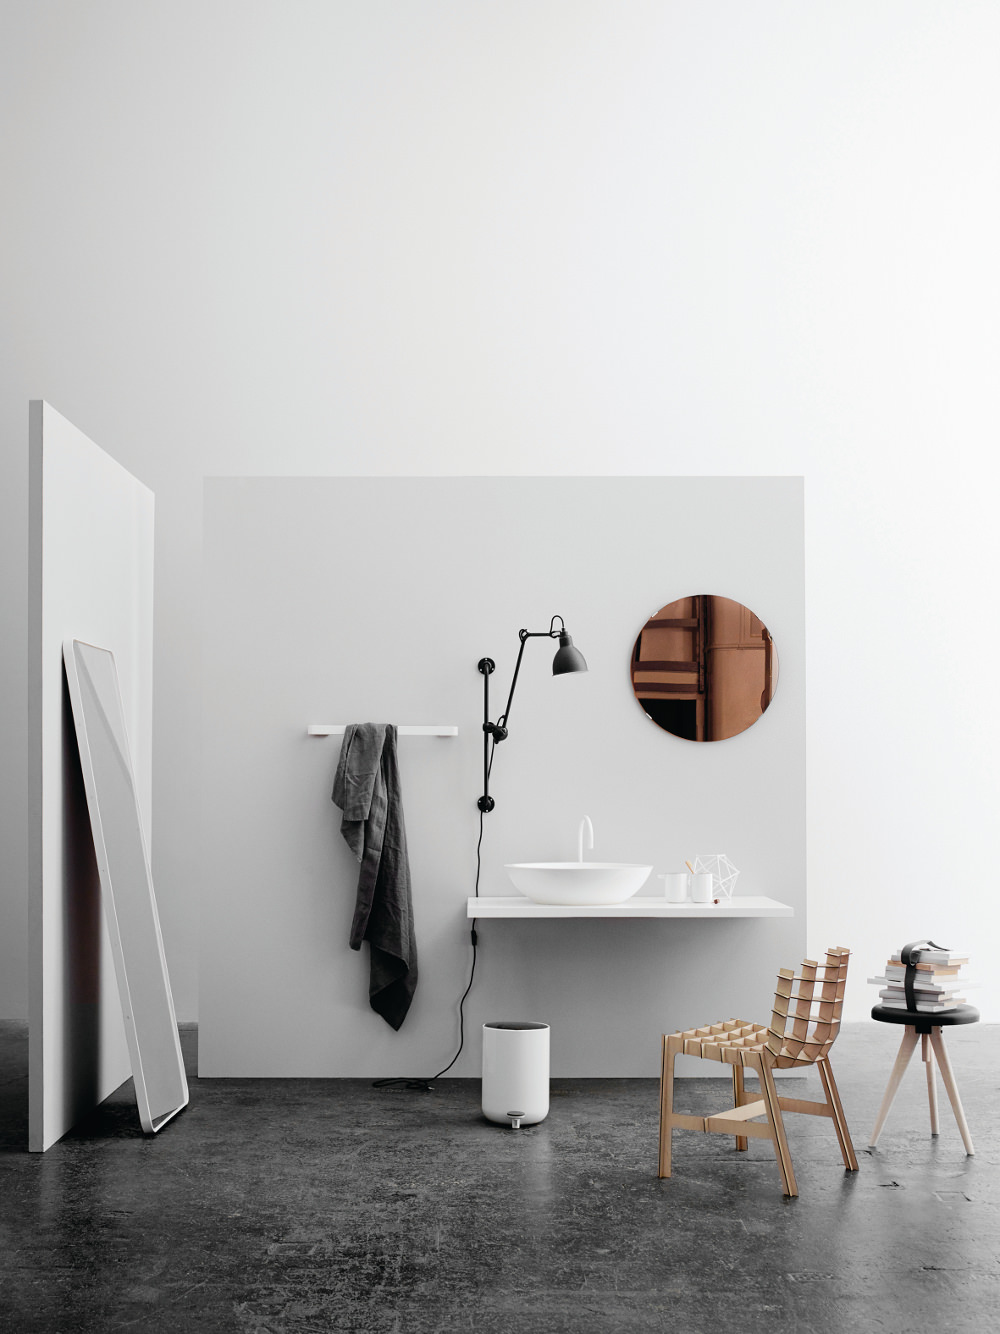 Bathroom Stand - Norm Architects